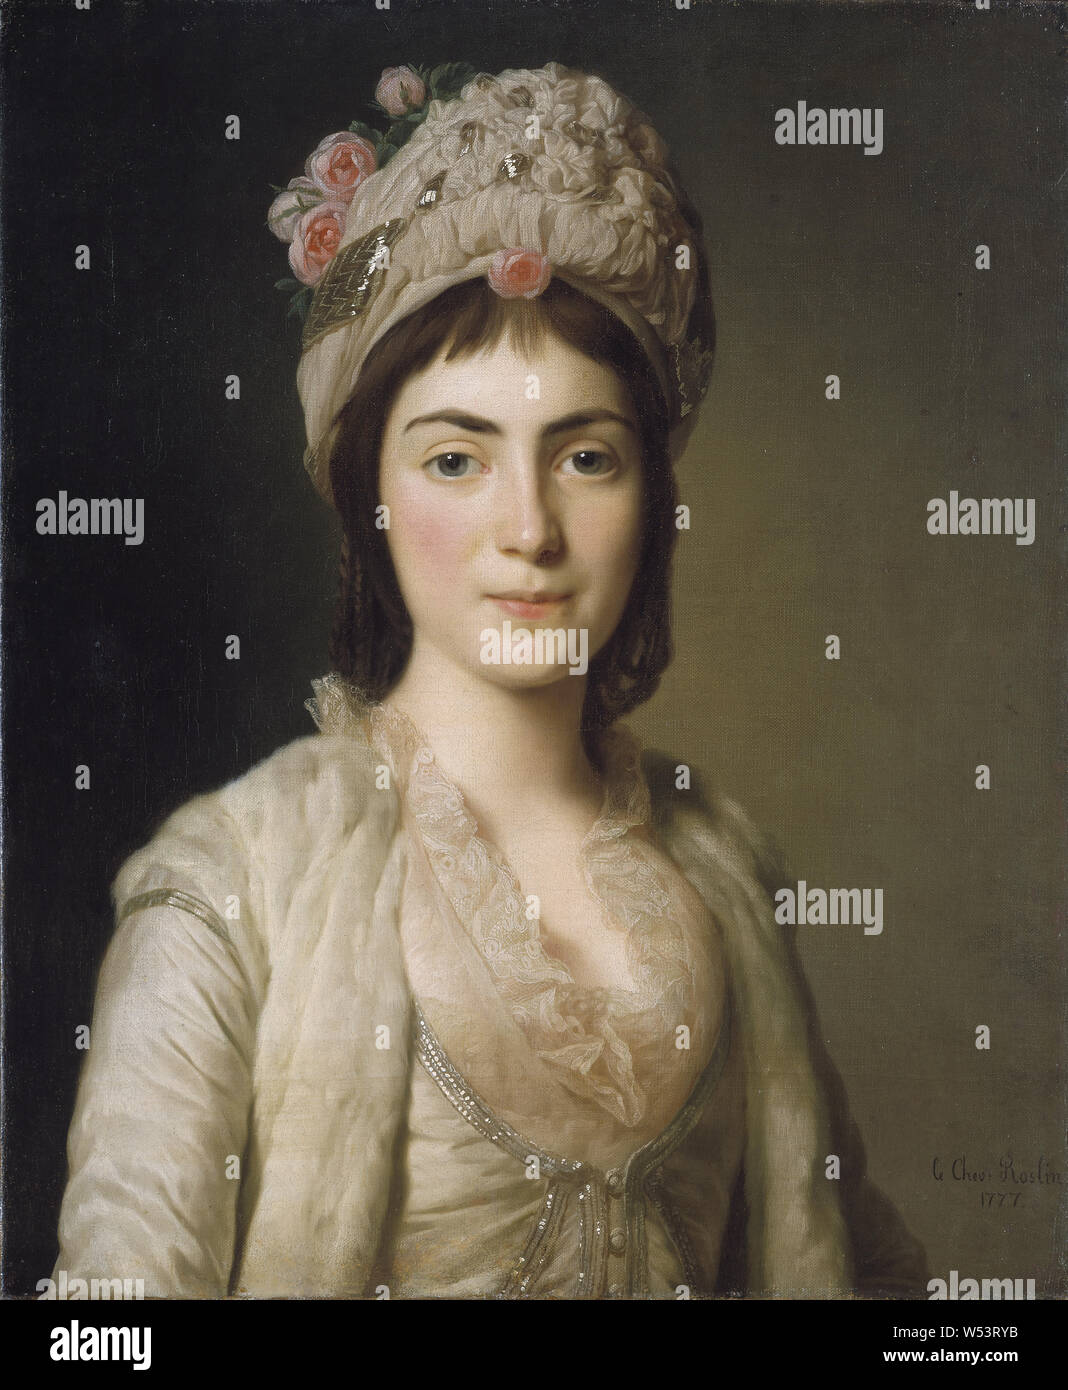 Alexander Roslin, Zoie Ghika, Moldavian Princess, painting, portrait, 1777, oil on canvas, Height, 64.7 cm (25.4 inches), Width, 53 cm (20.8 inches), Signed, le Chev, Roslin, 1777th Stock Photo